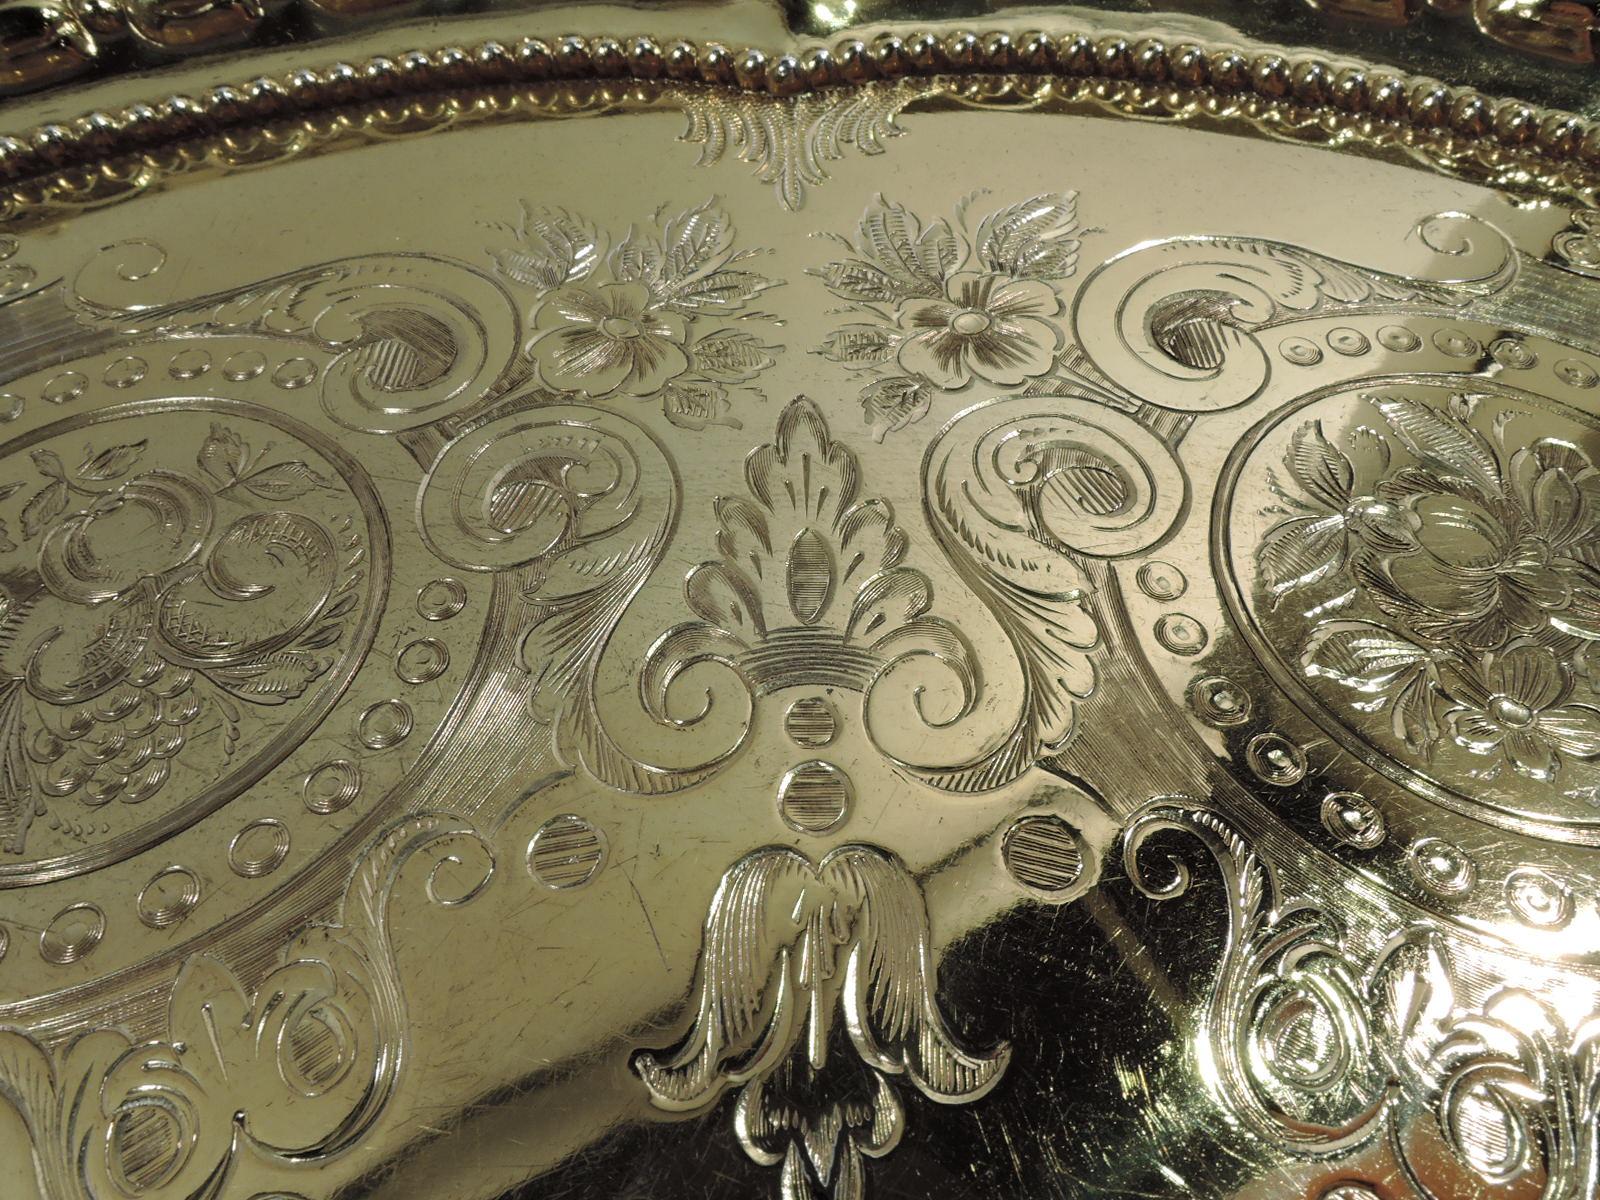 Sumptuous Regency Revival Gilt Sterling Silver Salver Tray by Howard 1